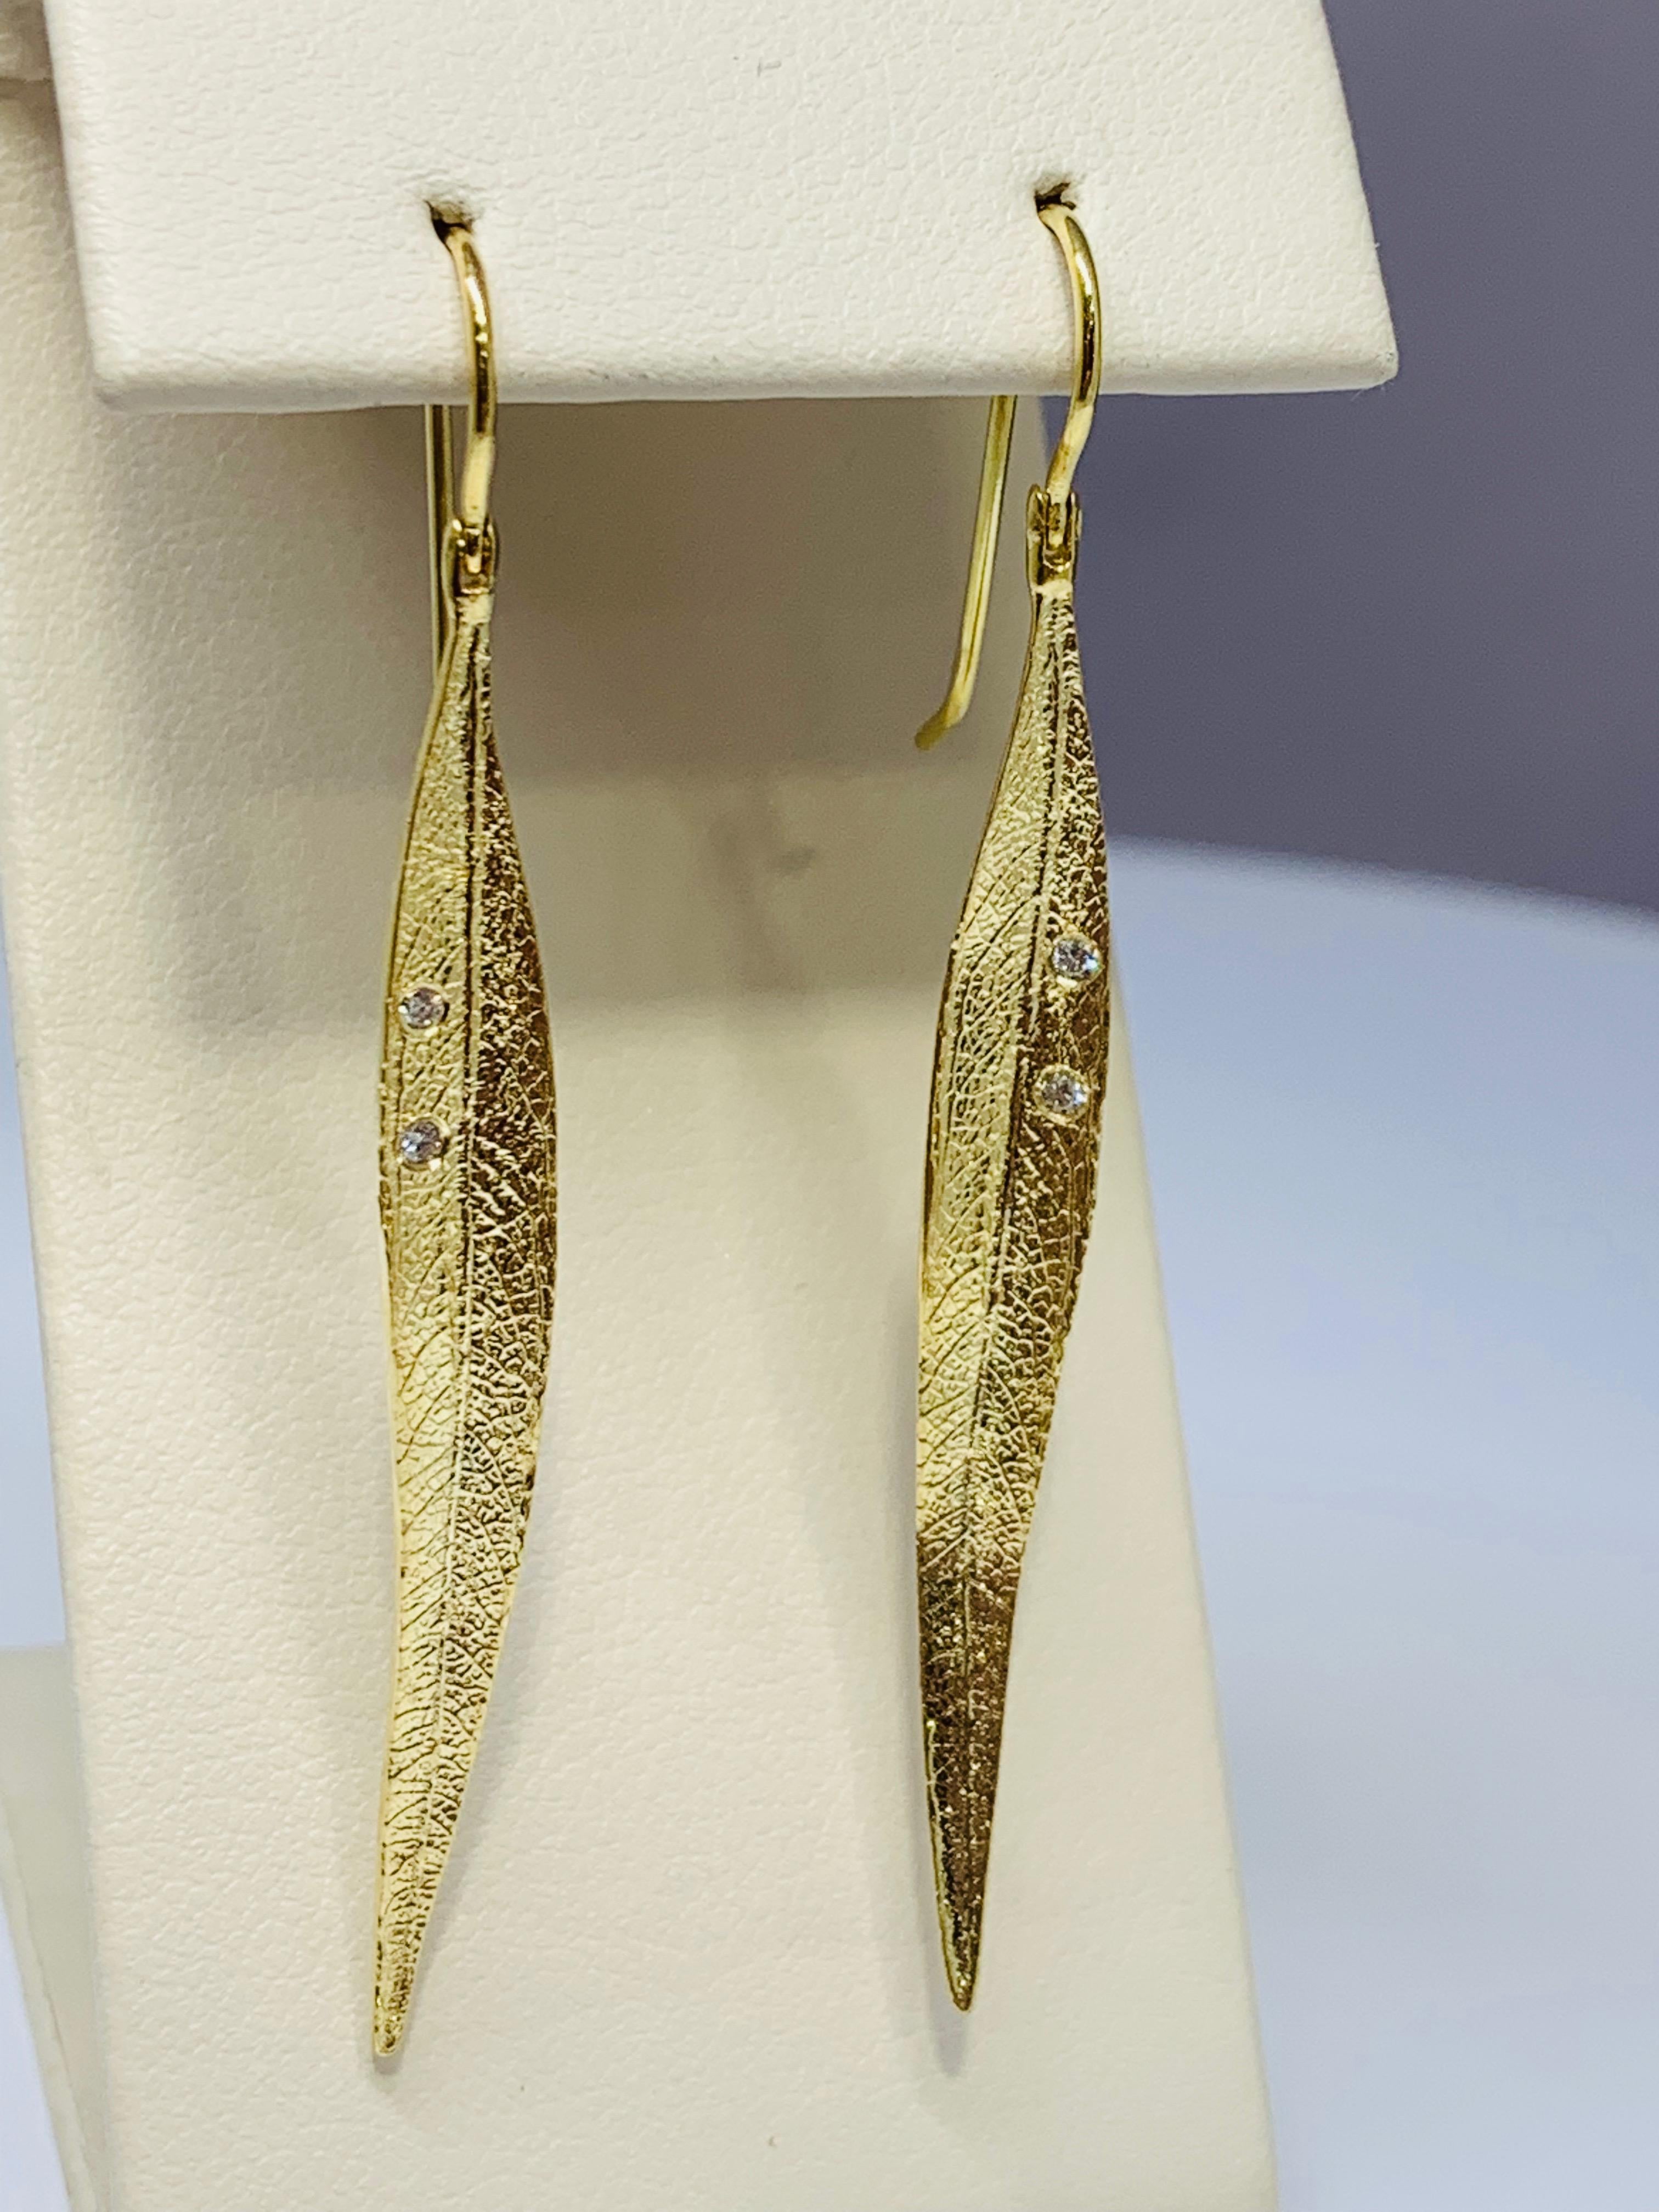 These gorgeous Cherie Dori earrings feature 0.04 carats of round diamonds, holding two small diamonds on each leaf. The earrings are textured for a natural leaf-like effect. These earrings are made of 18K yellow gold and are approximately 2 inches